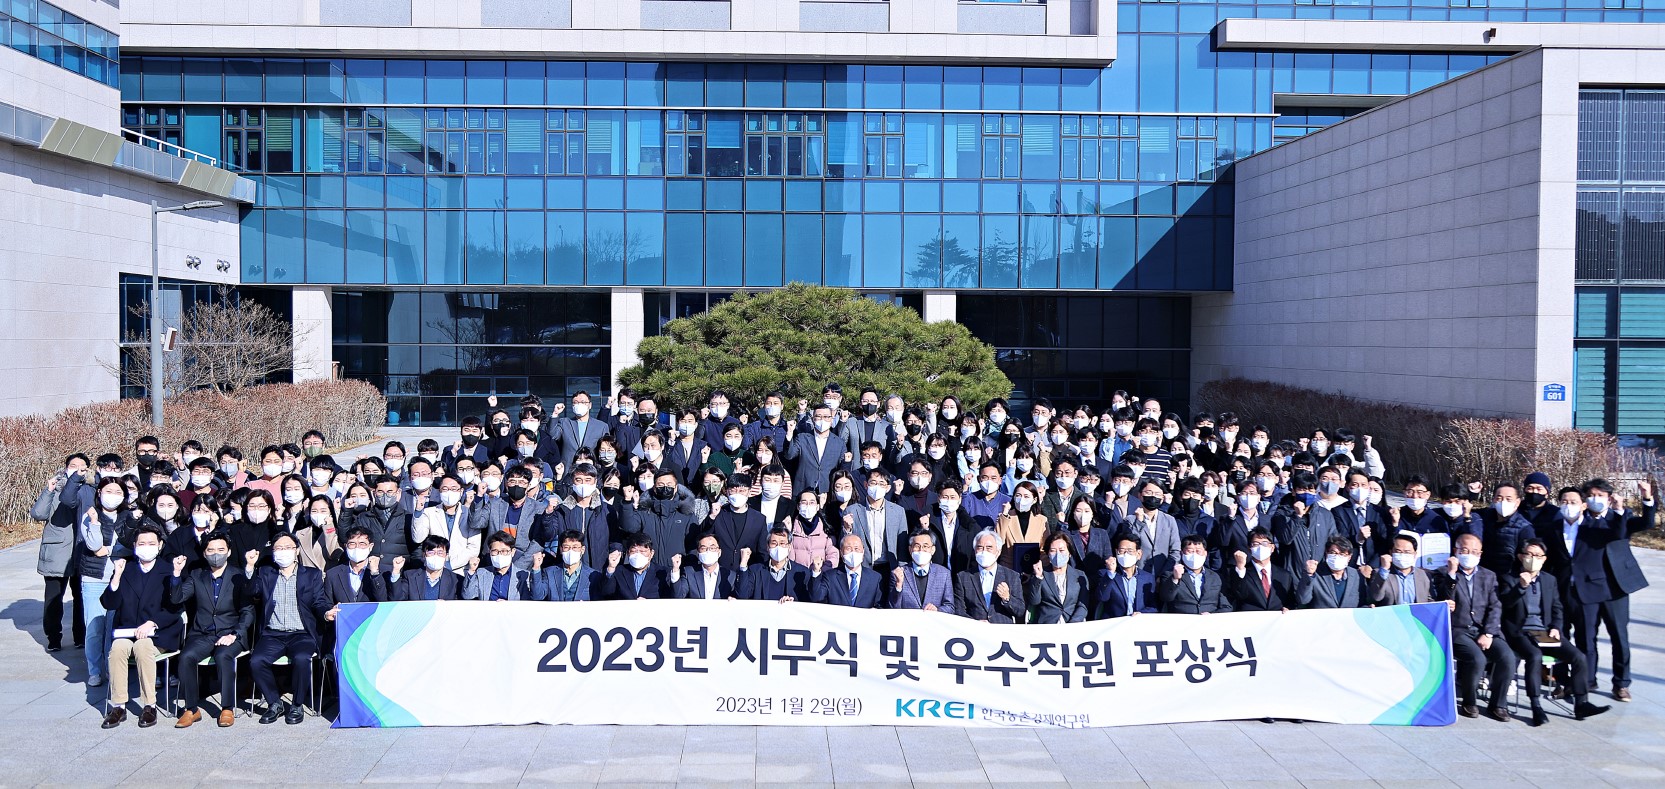 2023 Kick-off Meeting: KREI Actively Responding to Major Issues and Agenda